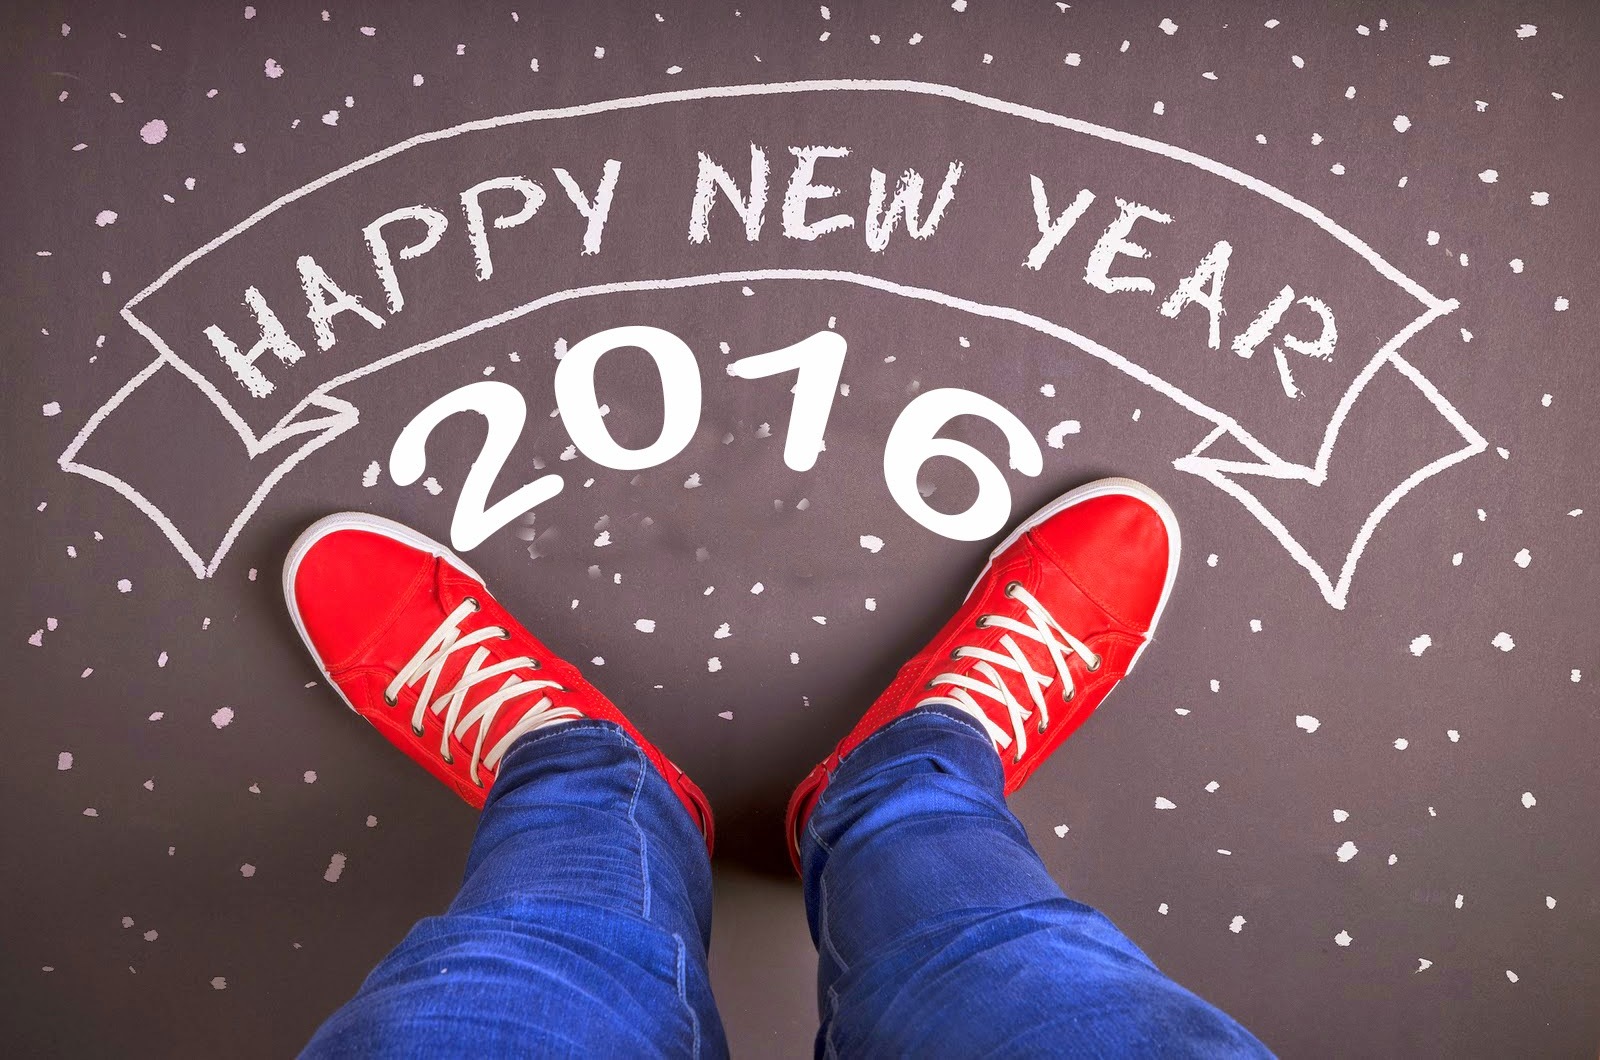 Happy New Year SMS Messages Wishes Wallpapers 2016 1600x1060